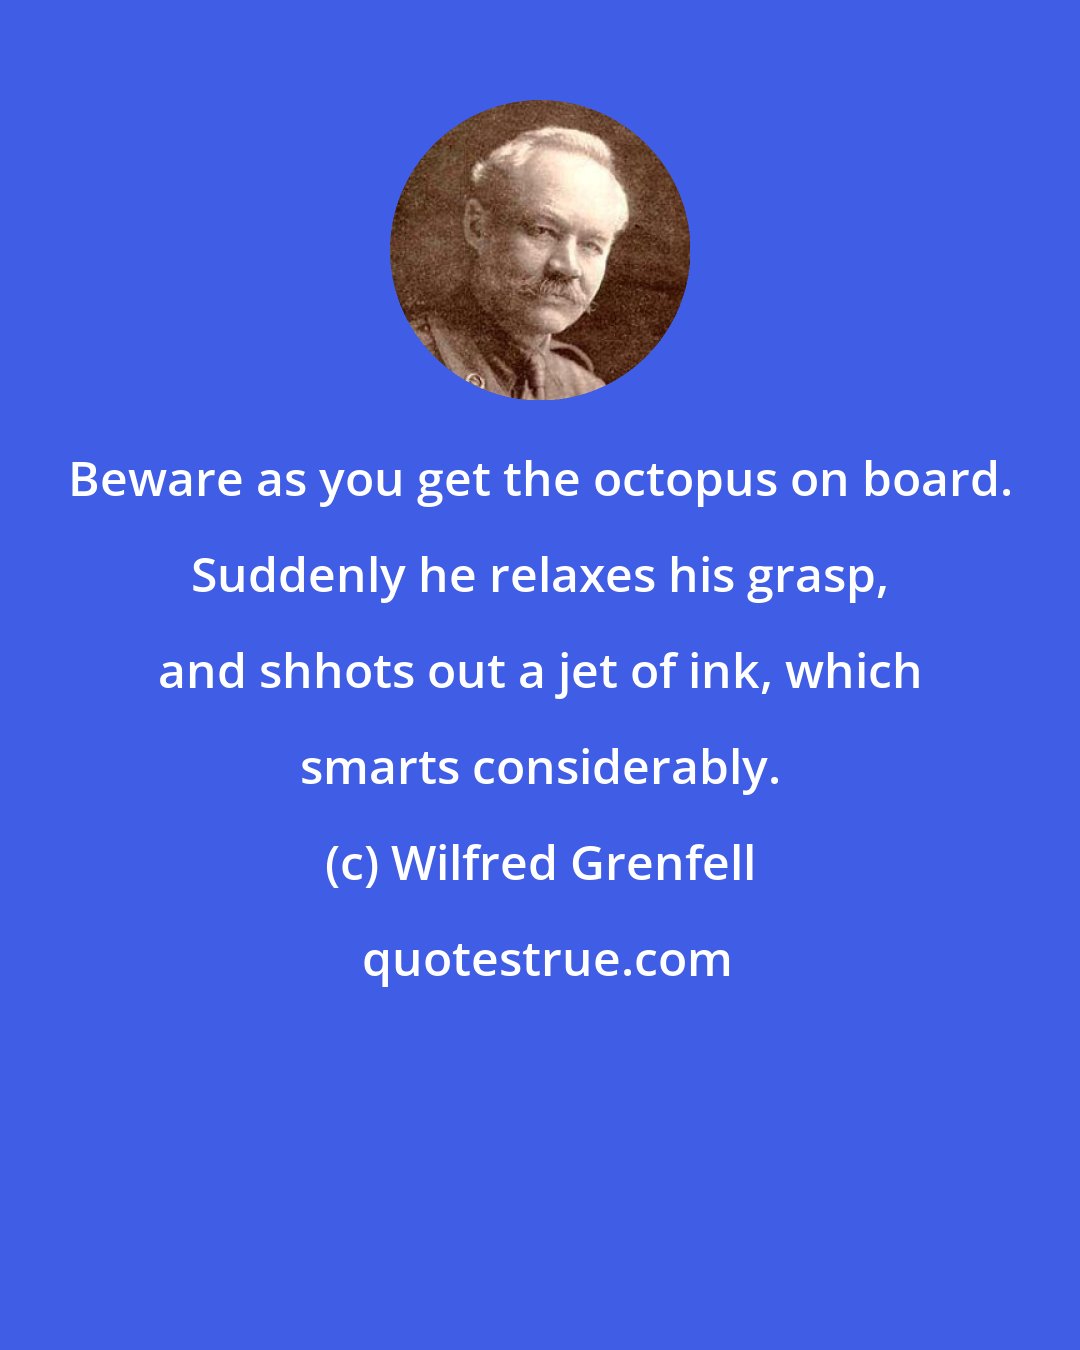 Wilfred Grenfell: Beware as you get the octopus on board. Suddenly he relaxes his grasp, and shhots out a jet of ink, which smarts considerably.